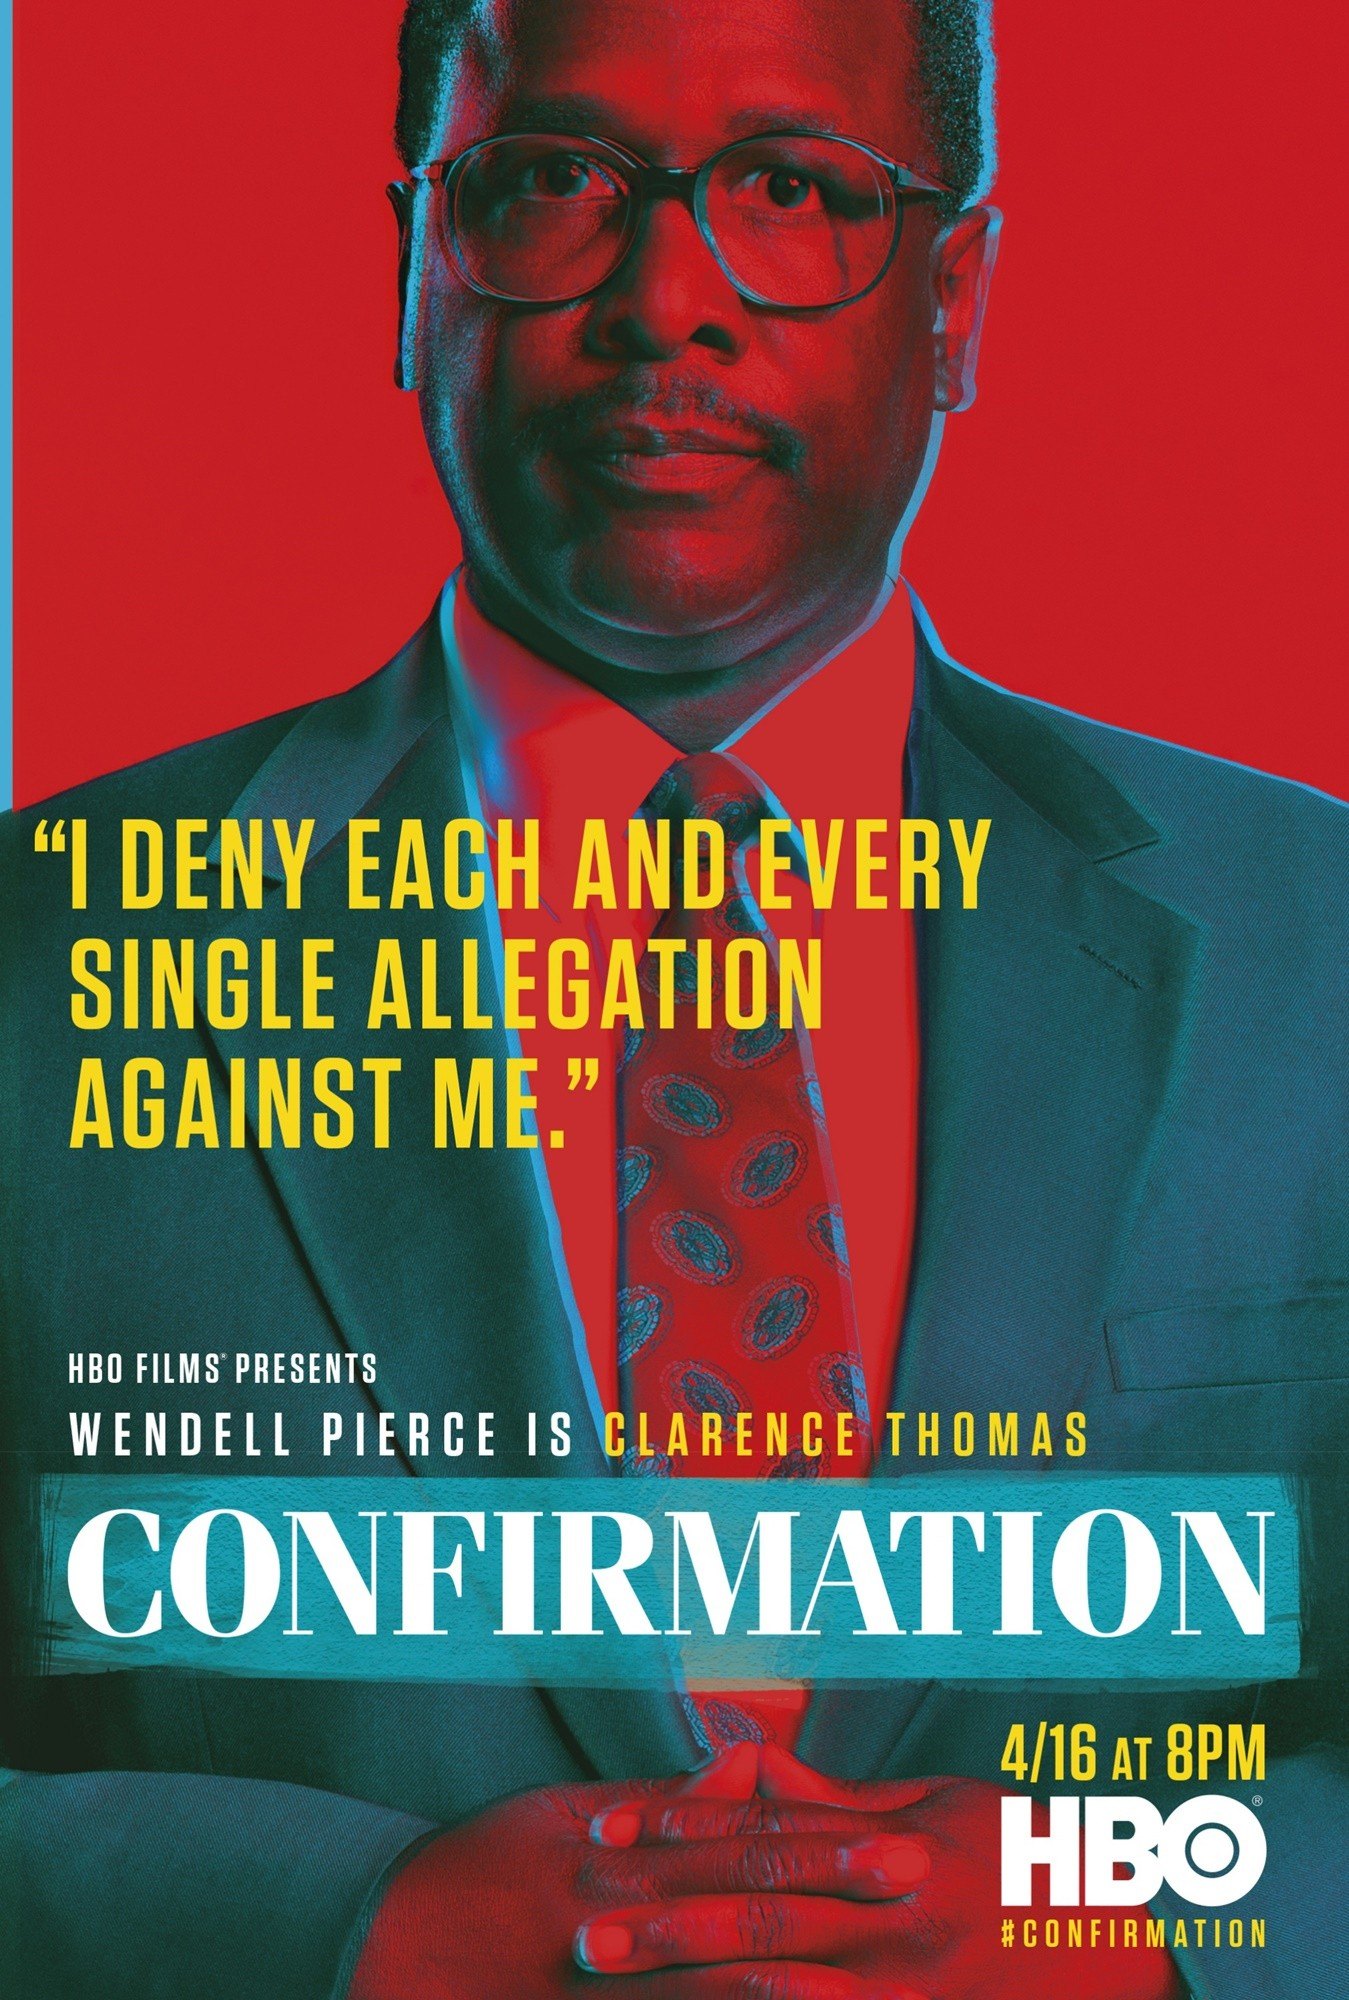 Poster of HBO Films' Confirmation (2016)